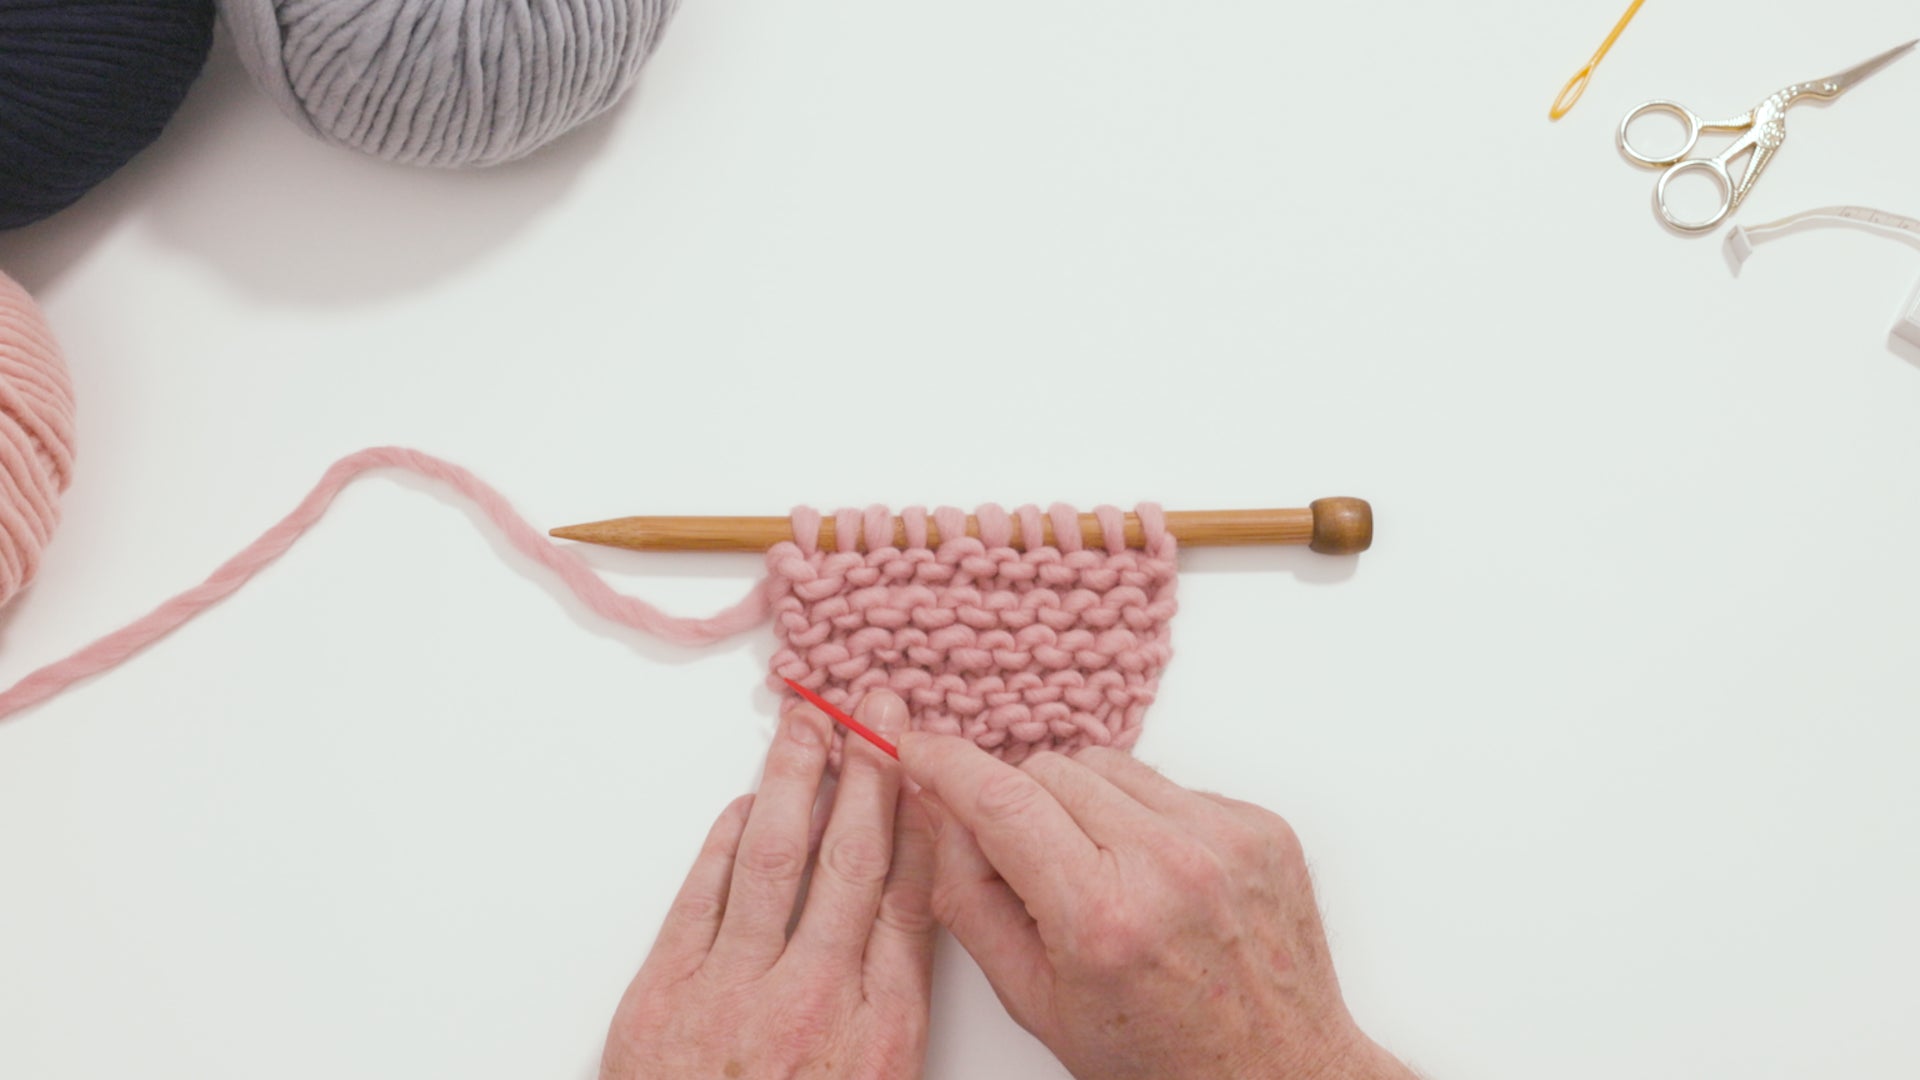 How to count stitches and rows in crochet - The Blog - NL